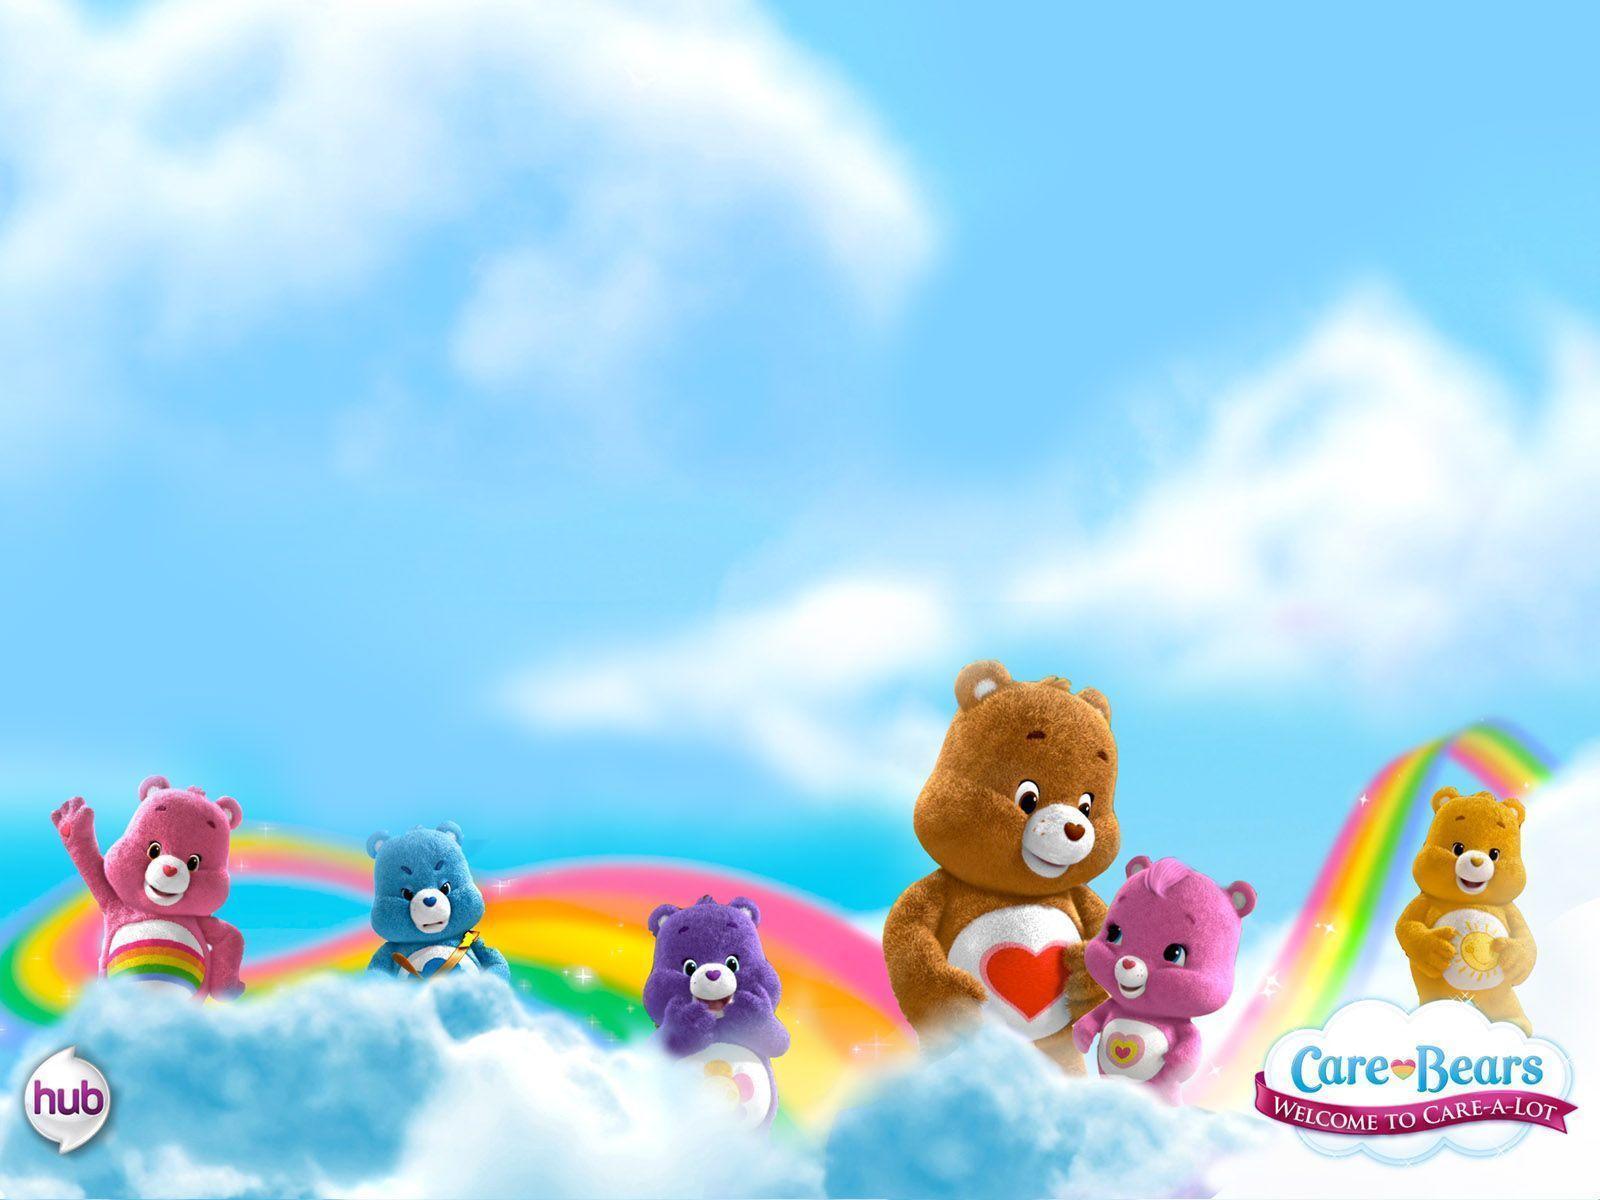 Childcare Wallpaper. Childcare Wallpaper, Childcare Background and